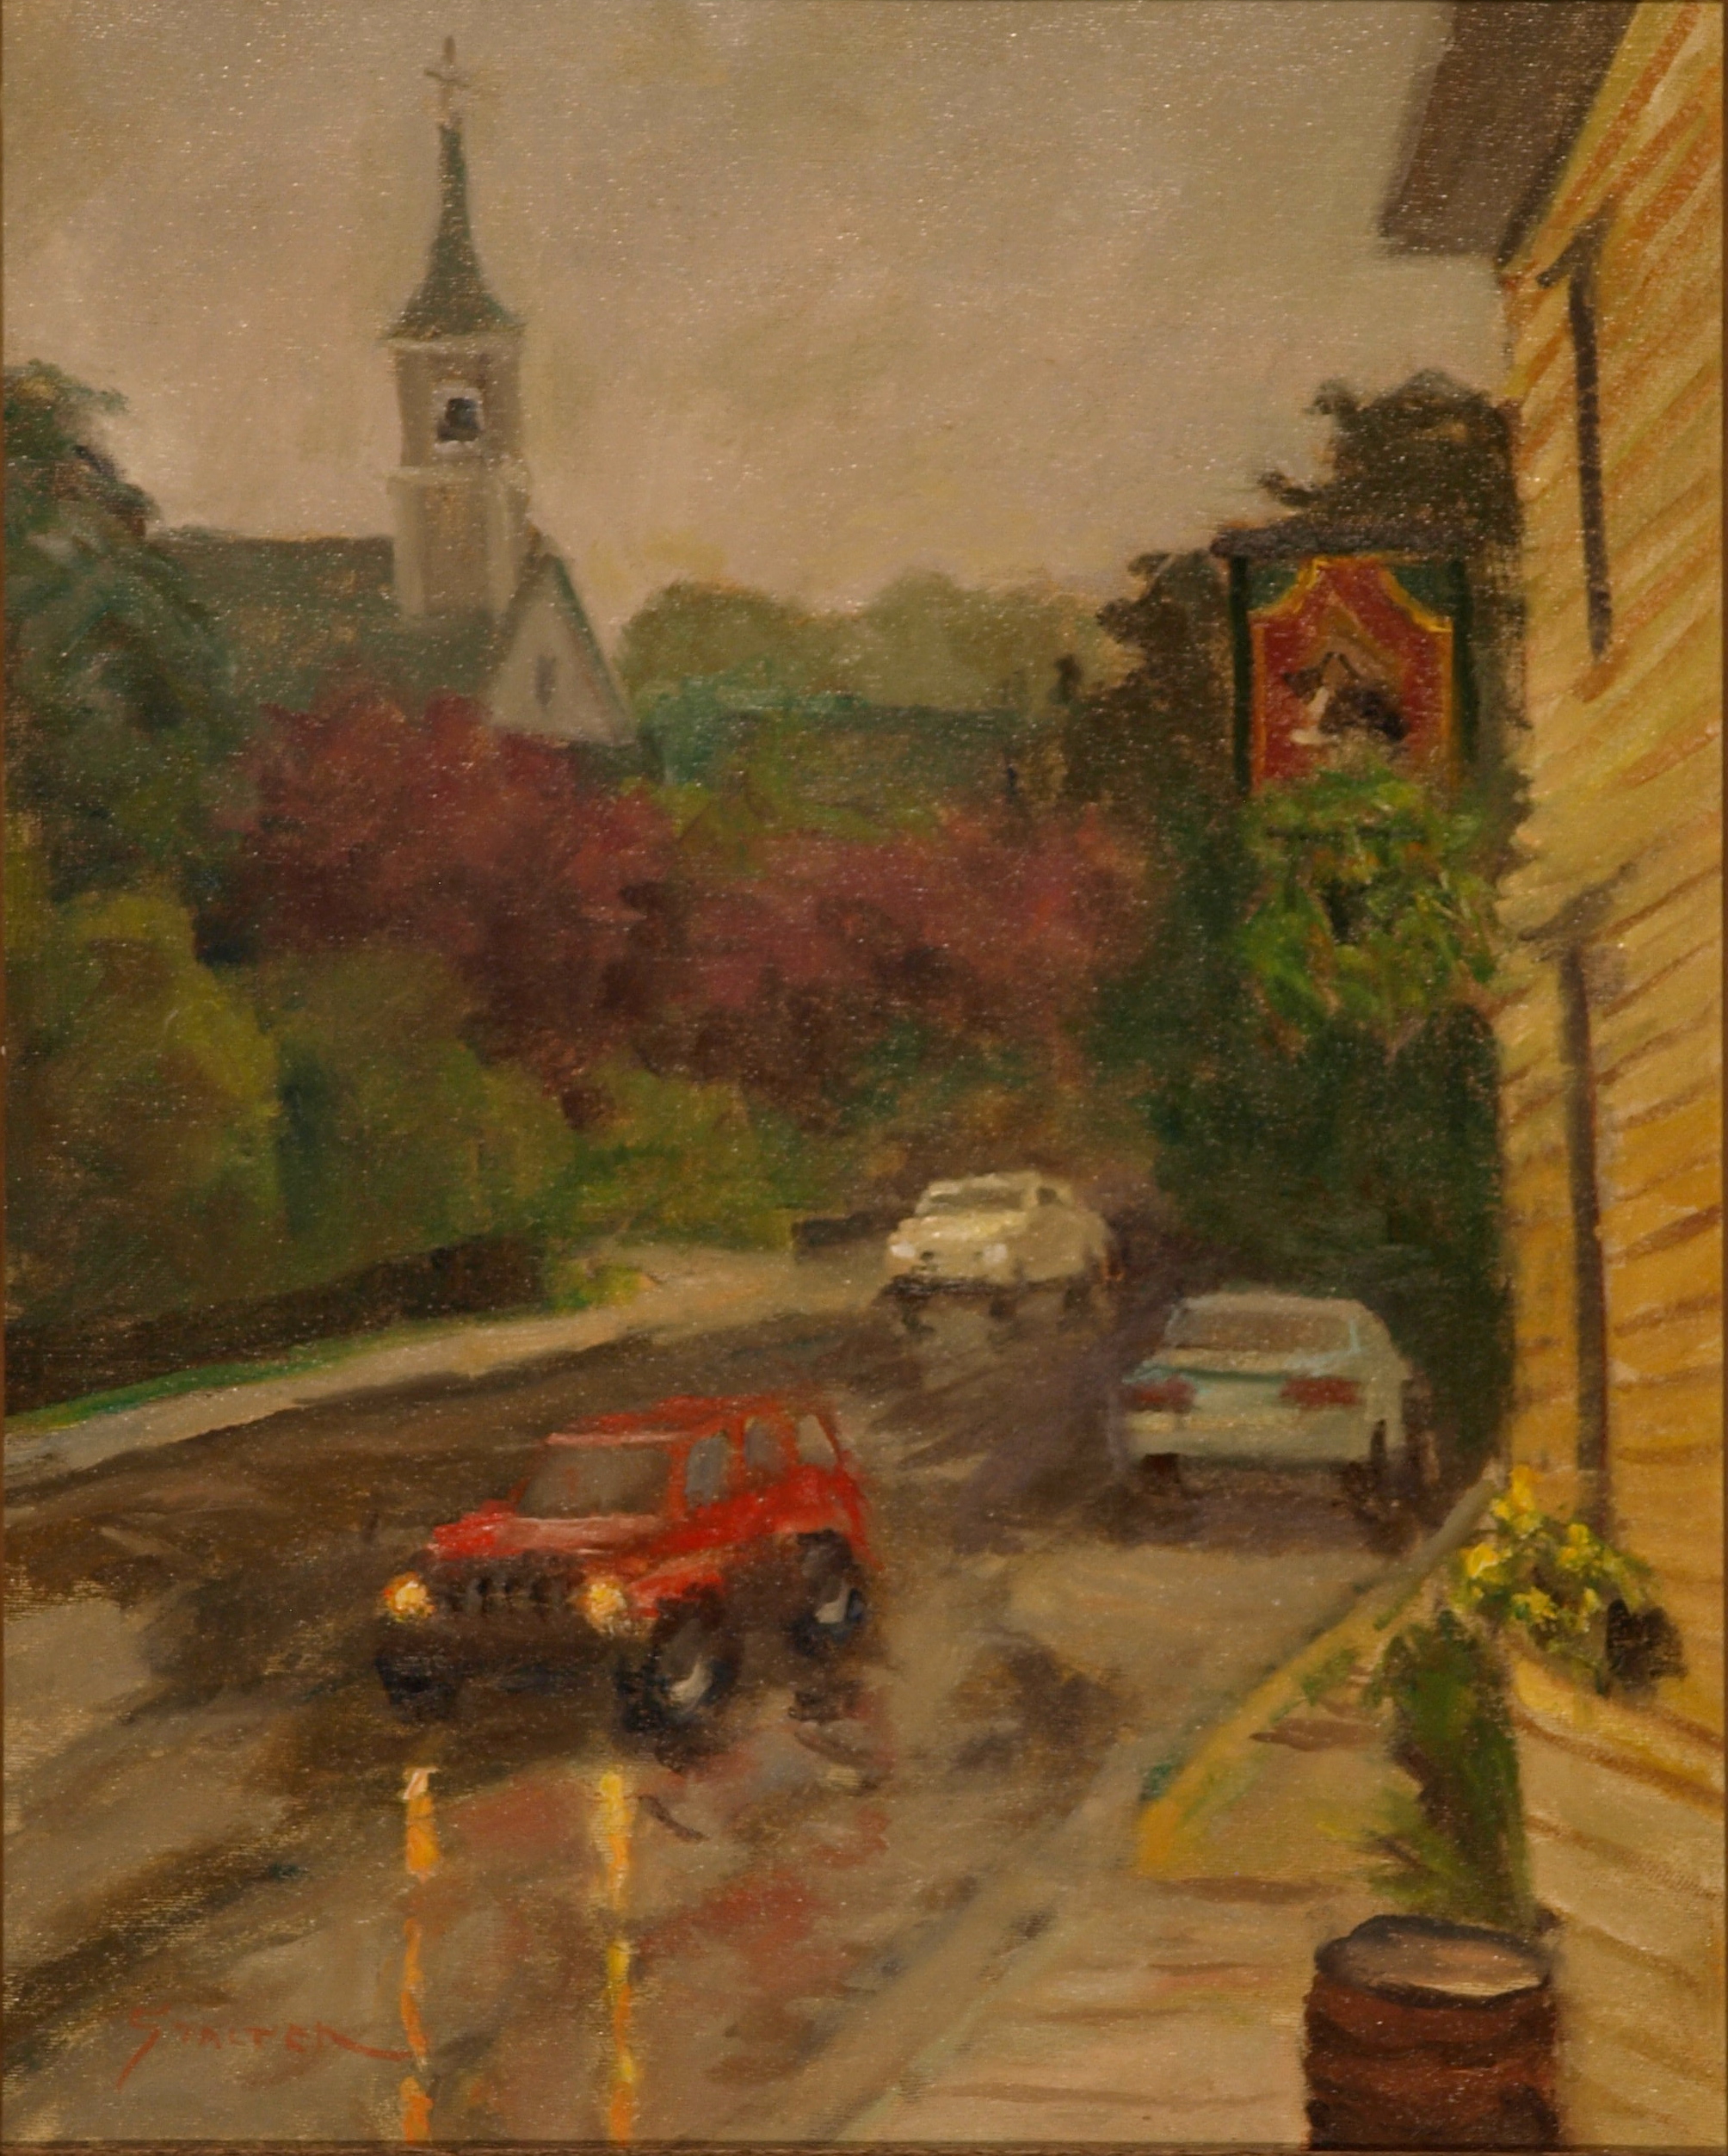 Rainy Day in Mystic, Oil on Canvas, 20 x 16 Inches, by Richard Stalter, $450